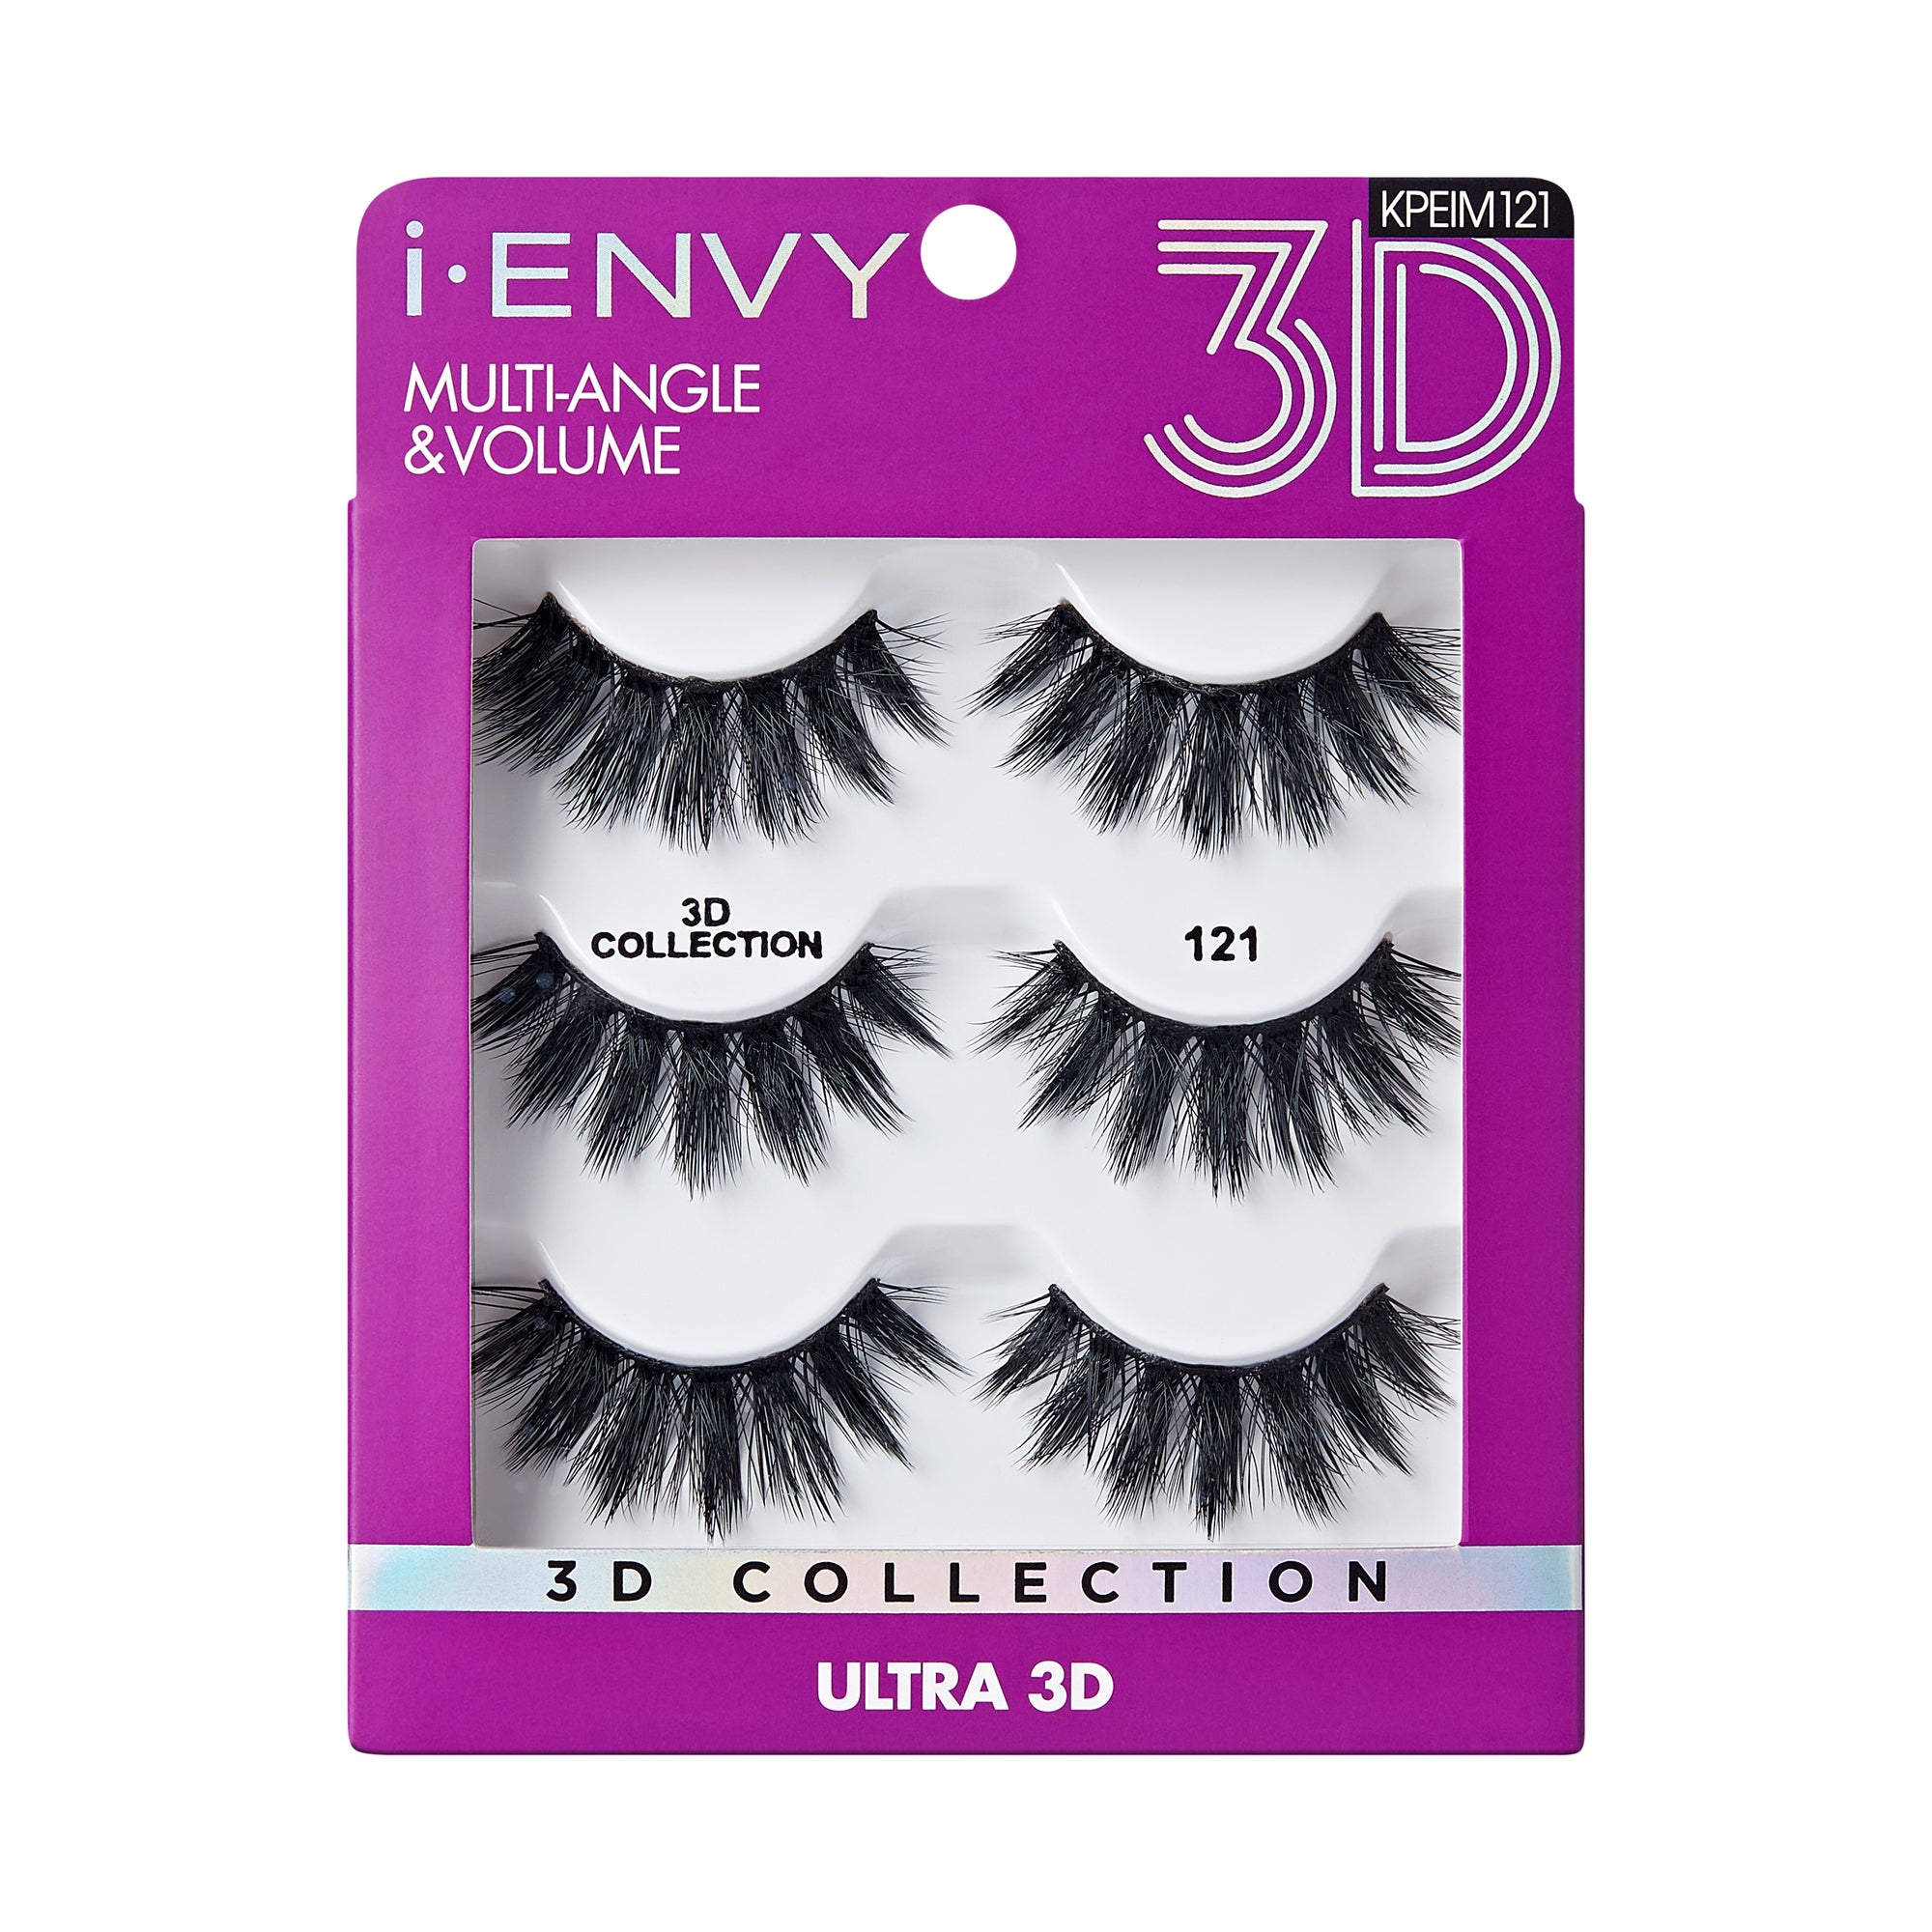 I.Envy By Kiss 3D Lashes Multi Pack Multiangle & Volume Collection-121 (KPEIM121)